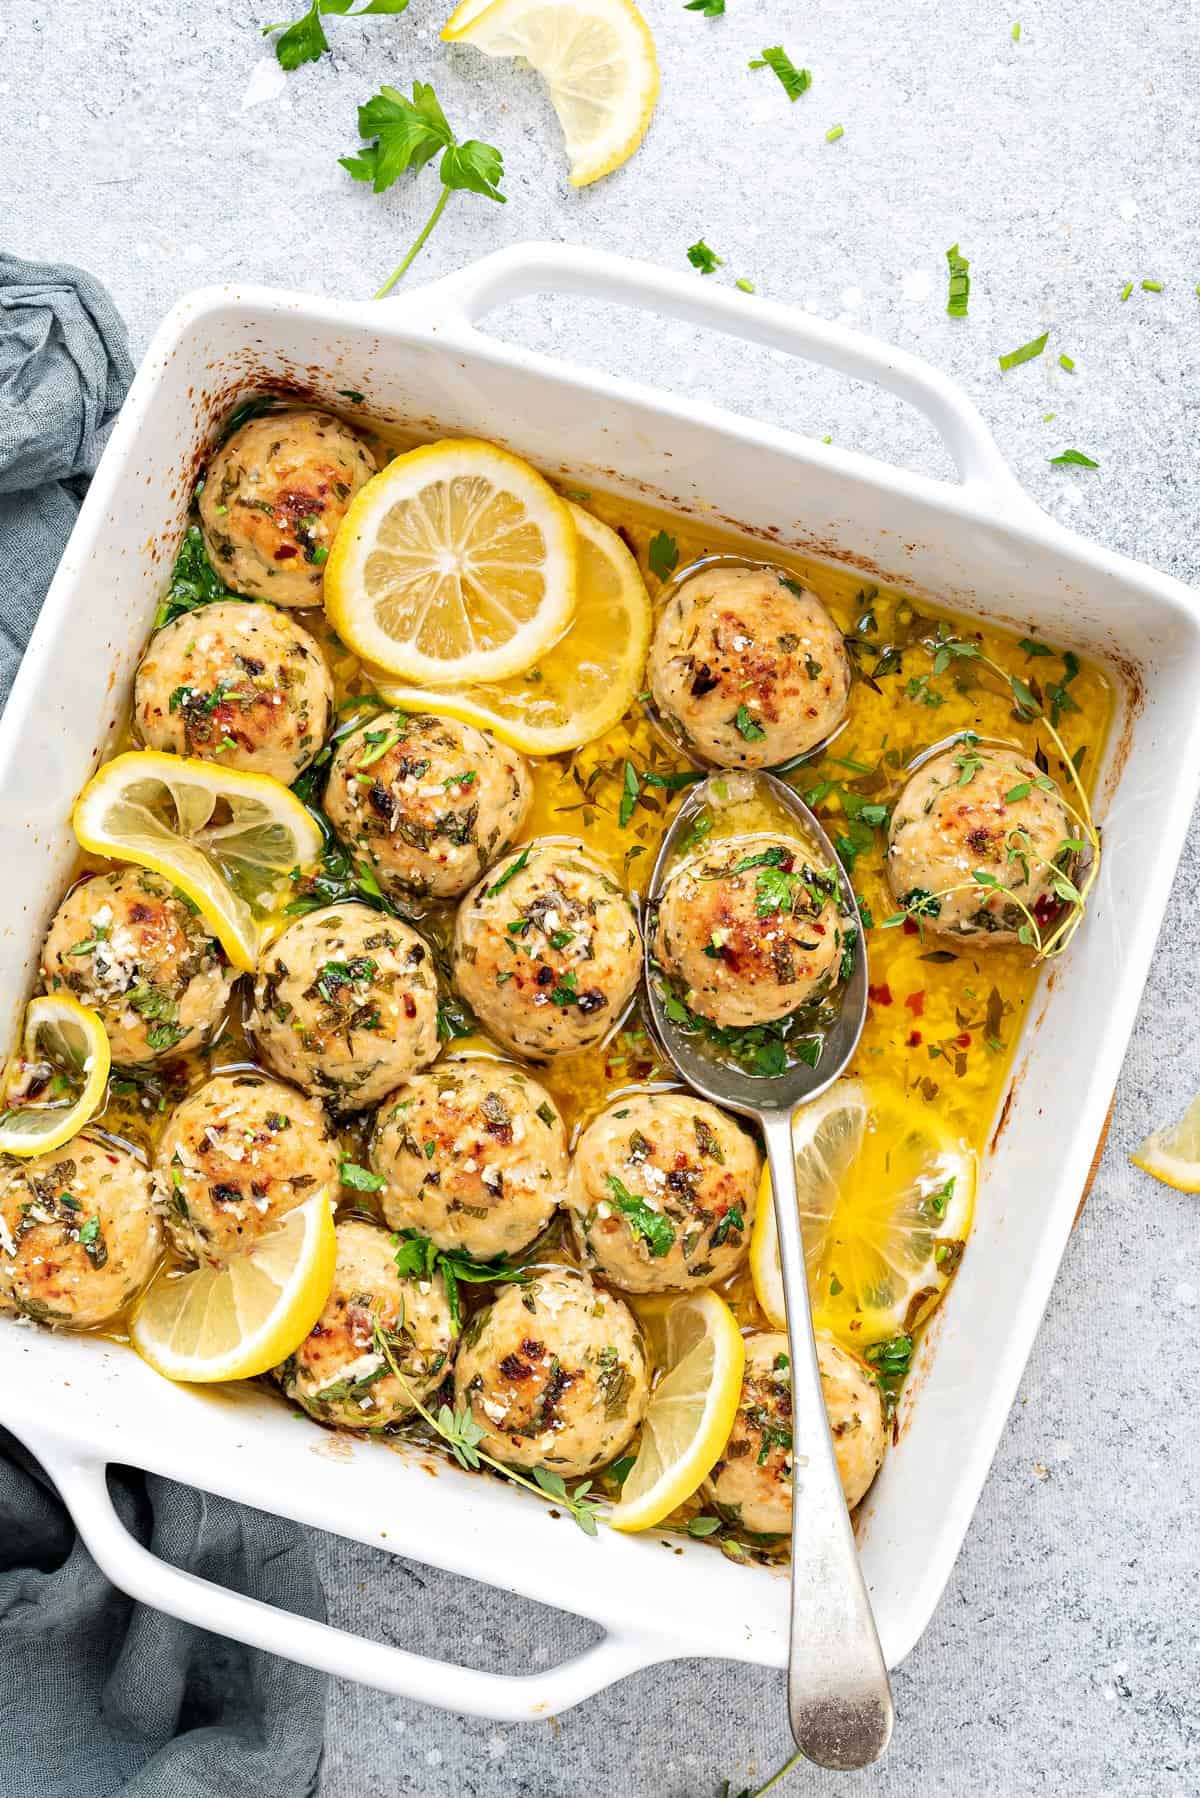 Baked turkey meatballs in lemon butter sauce in a casserole dish with slices of lemon.  